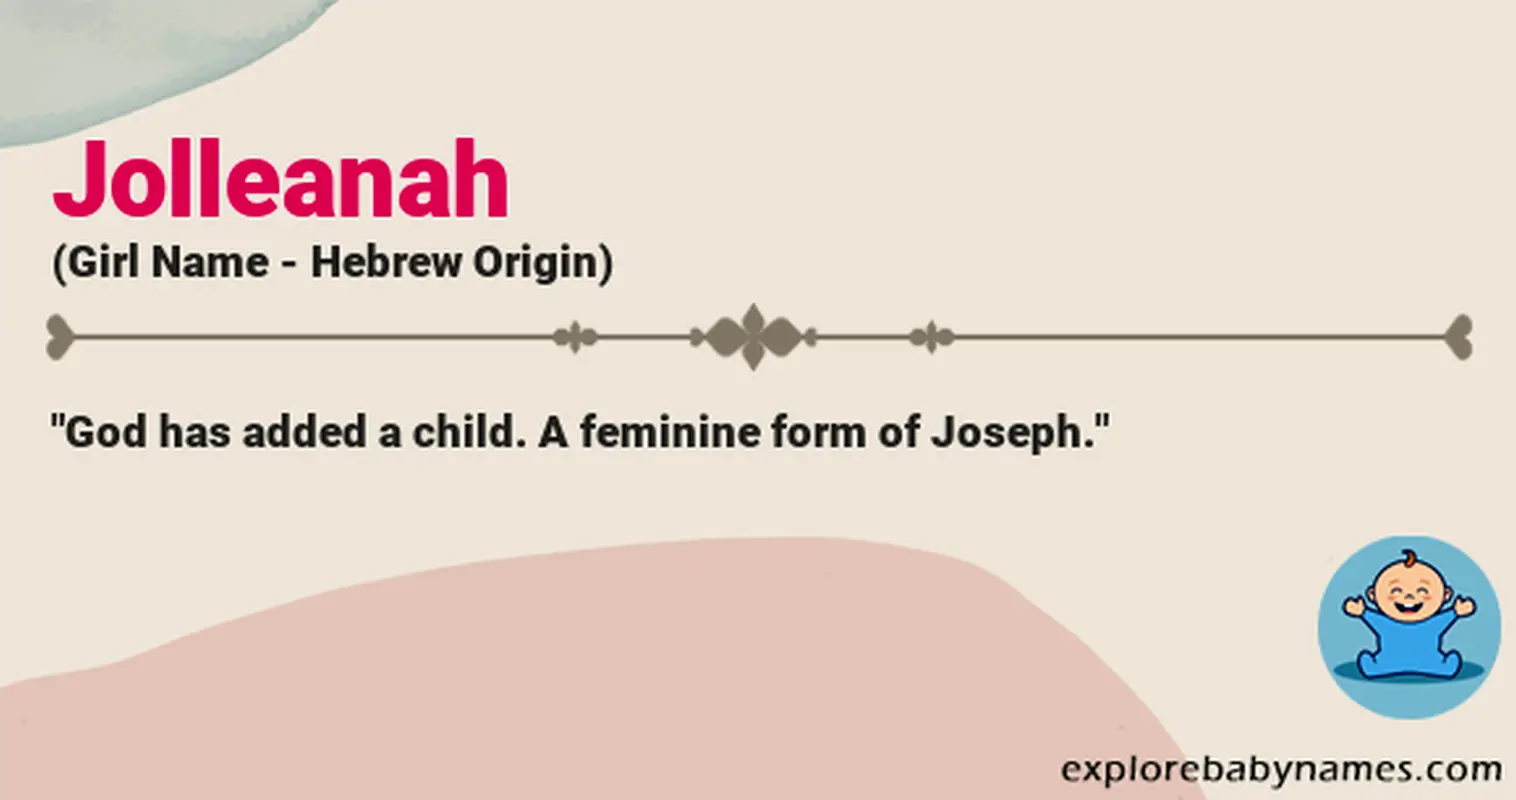 Meaning of Jolleanah